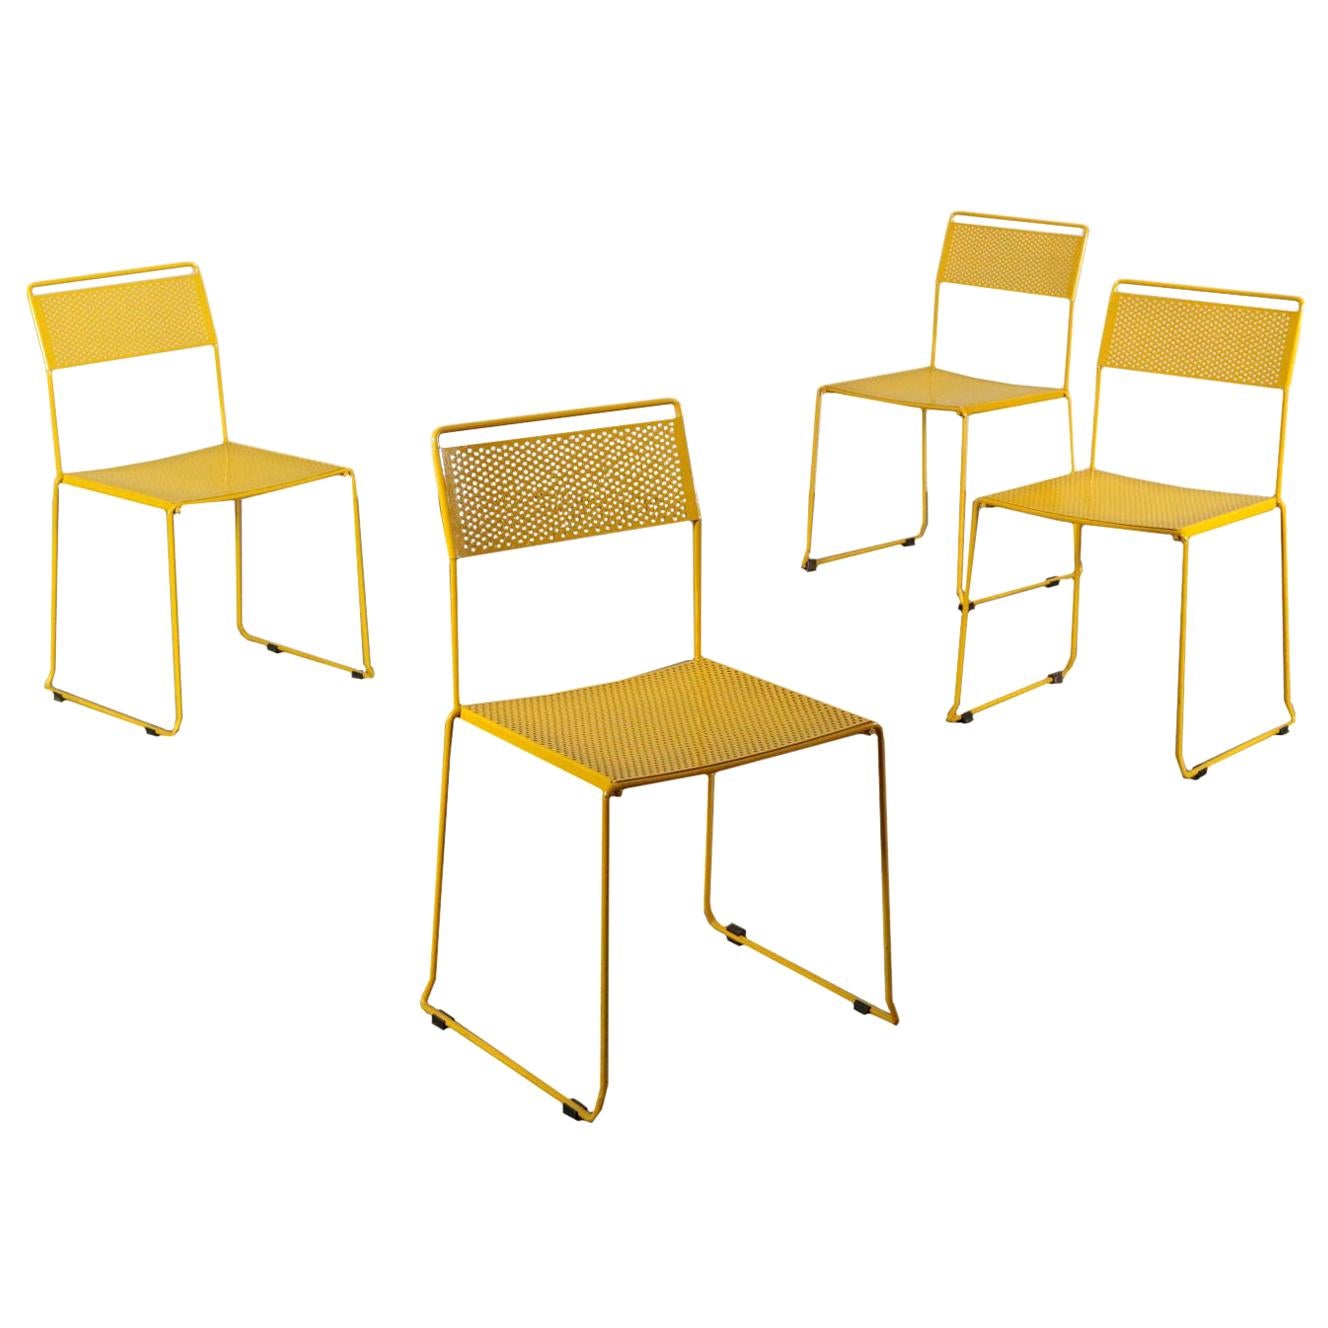 Group of Chairs Enameled Metal, Italy, 1970s-1980s